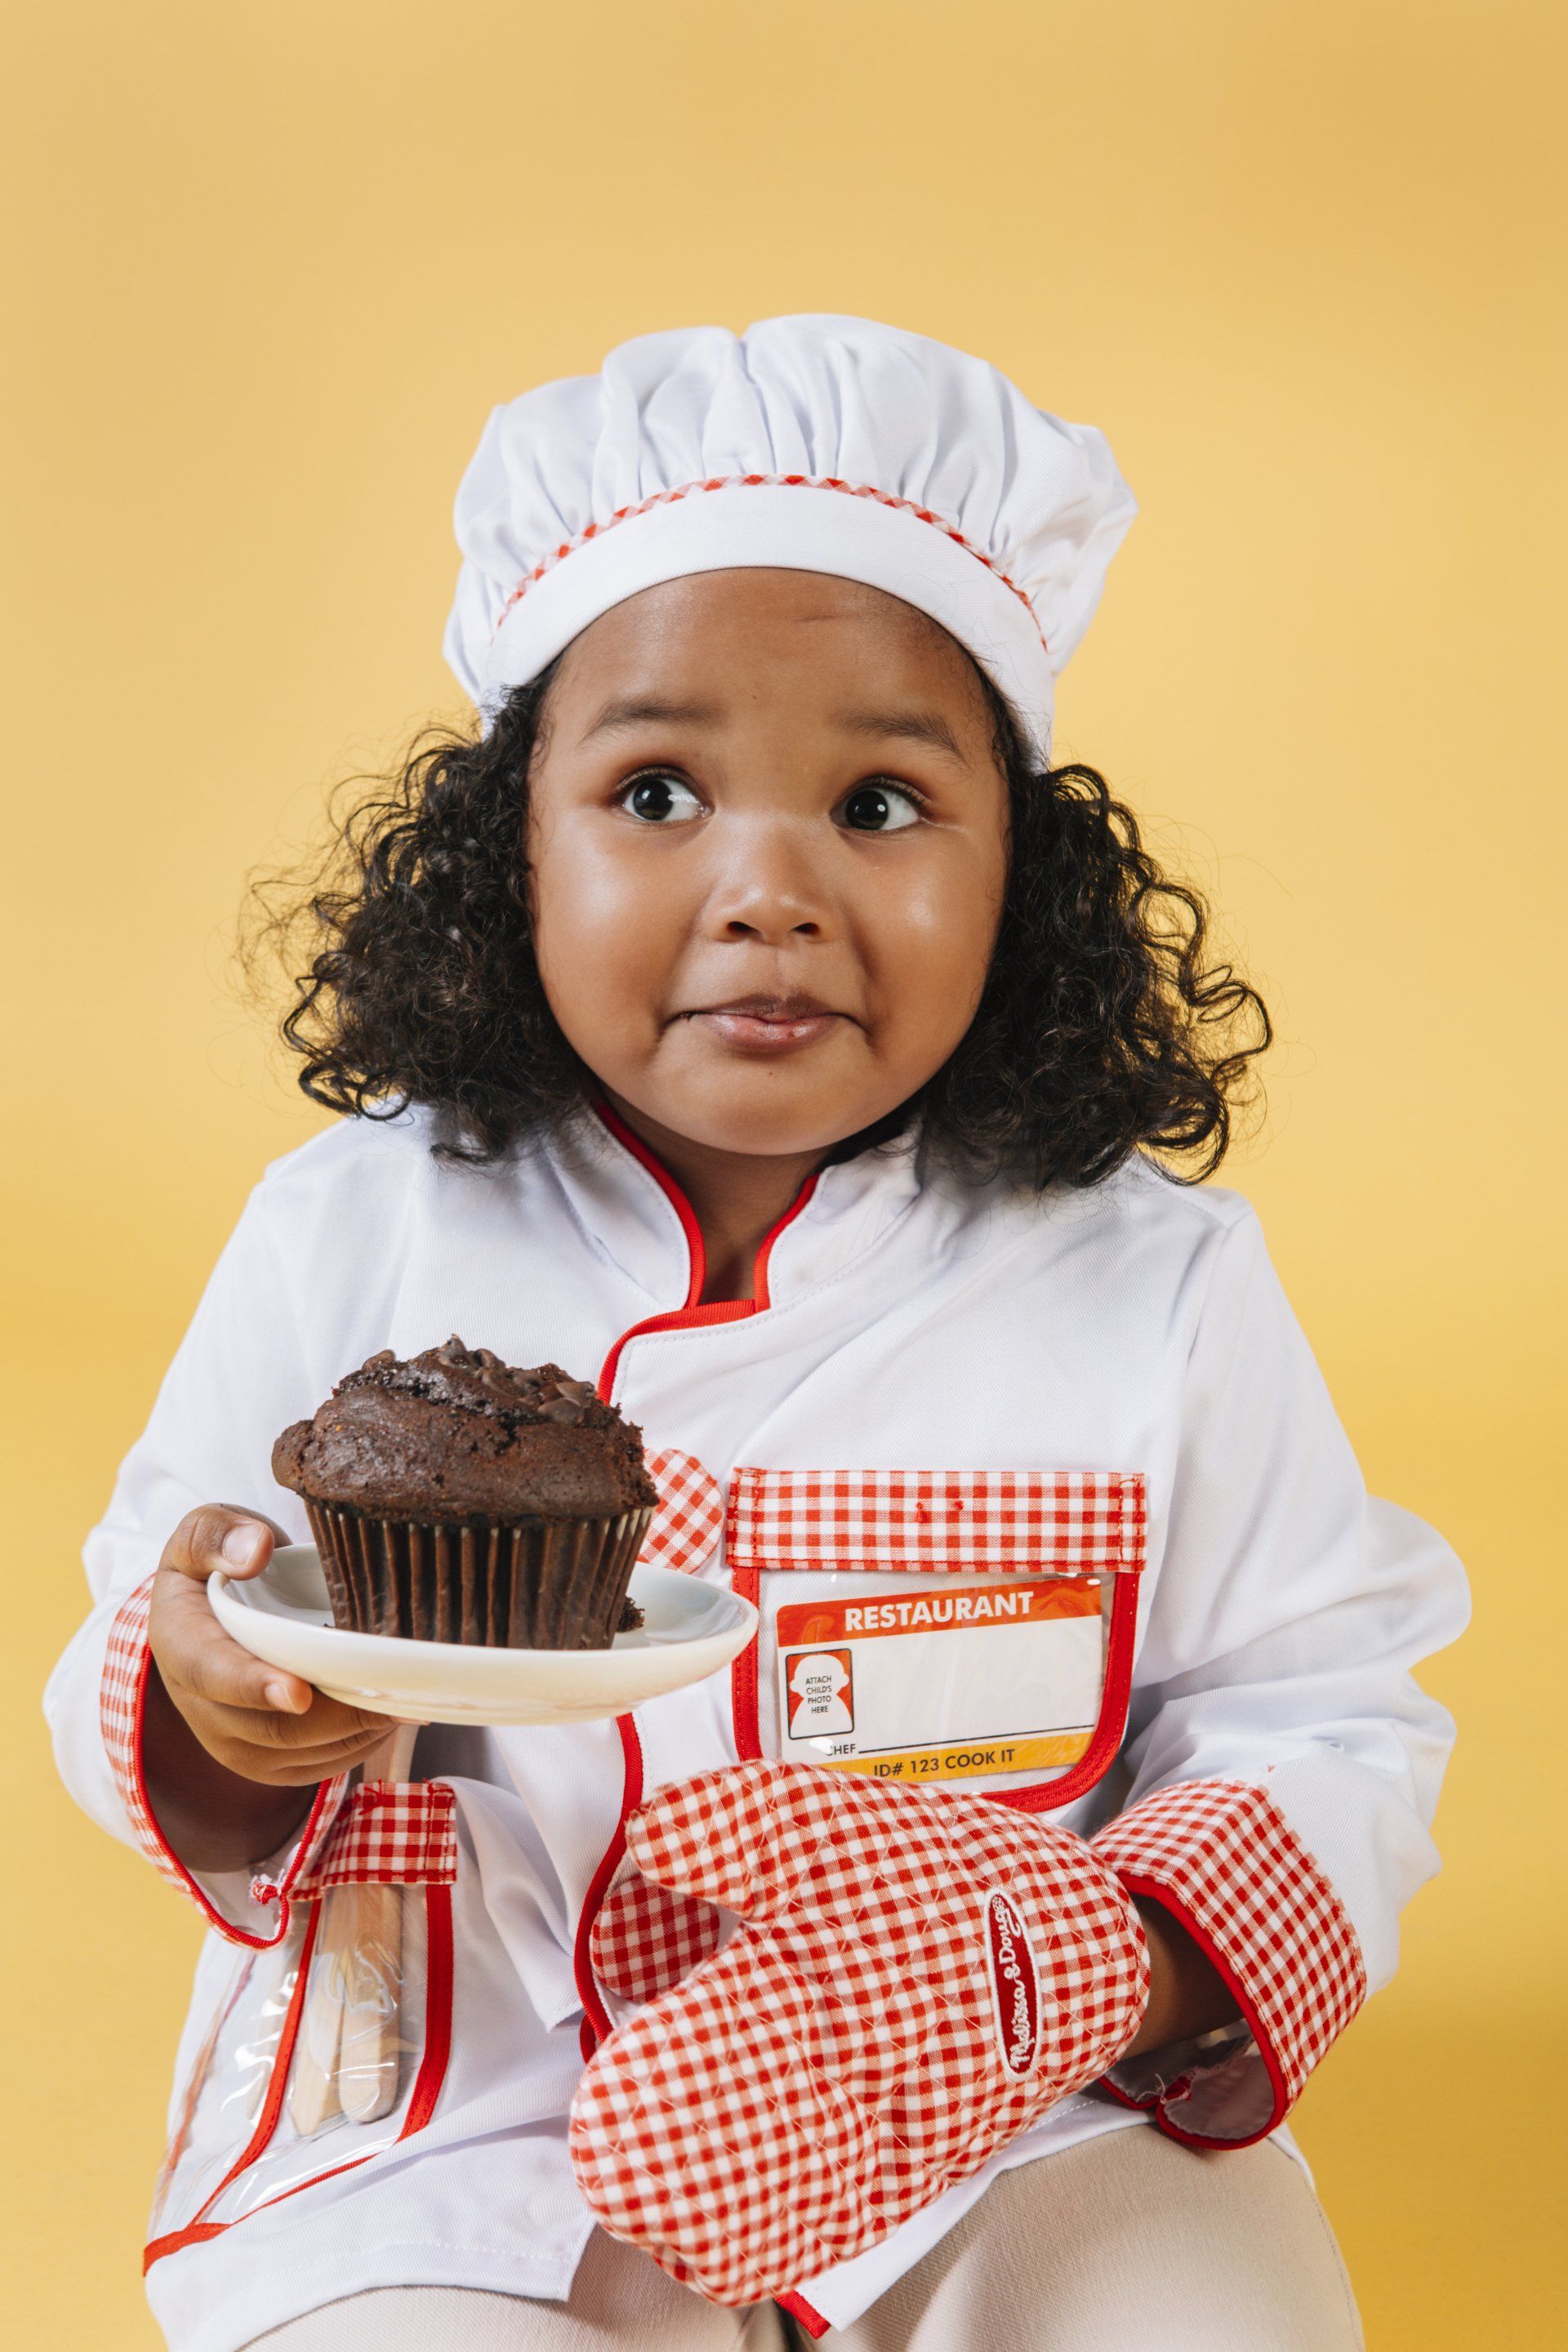 A little girl dressed in chef's whites who is unsure how to give a cake she's just made